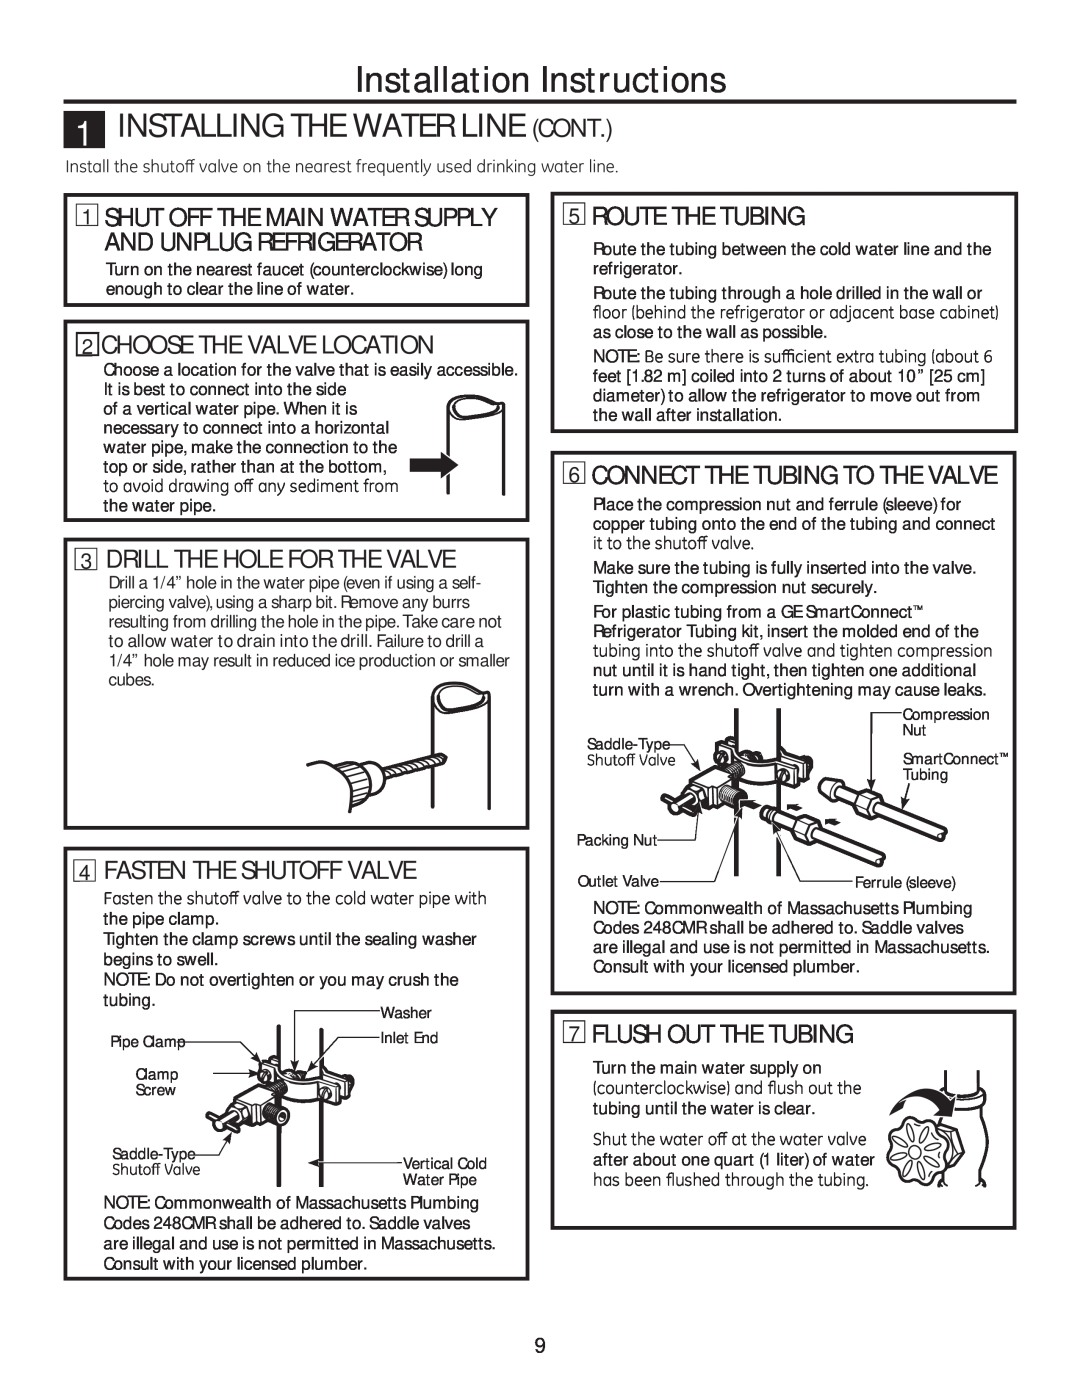 GE GTE18GTHWW Installation Instructions, Installing The Water Line Cont, Choose The Valve Location, Route The Tubing 